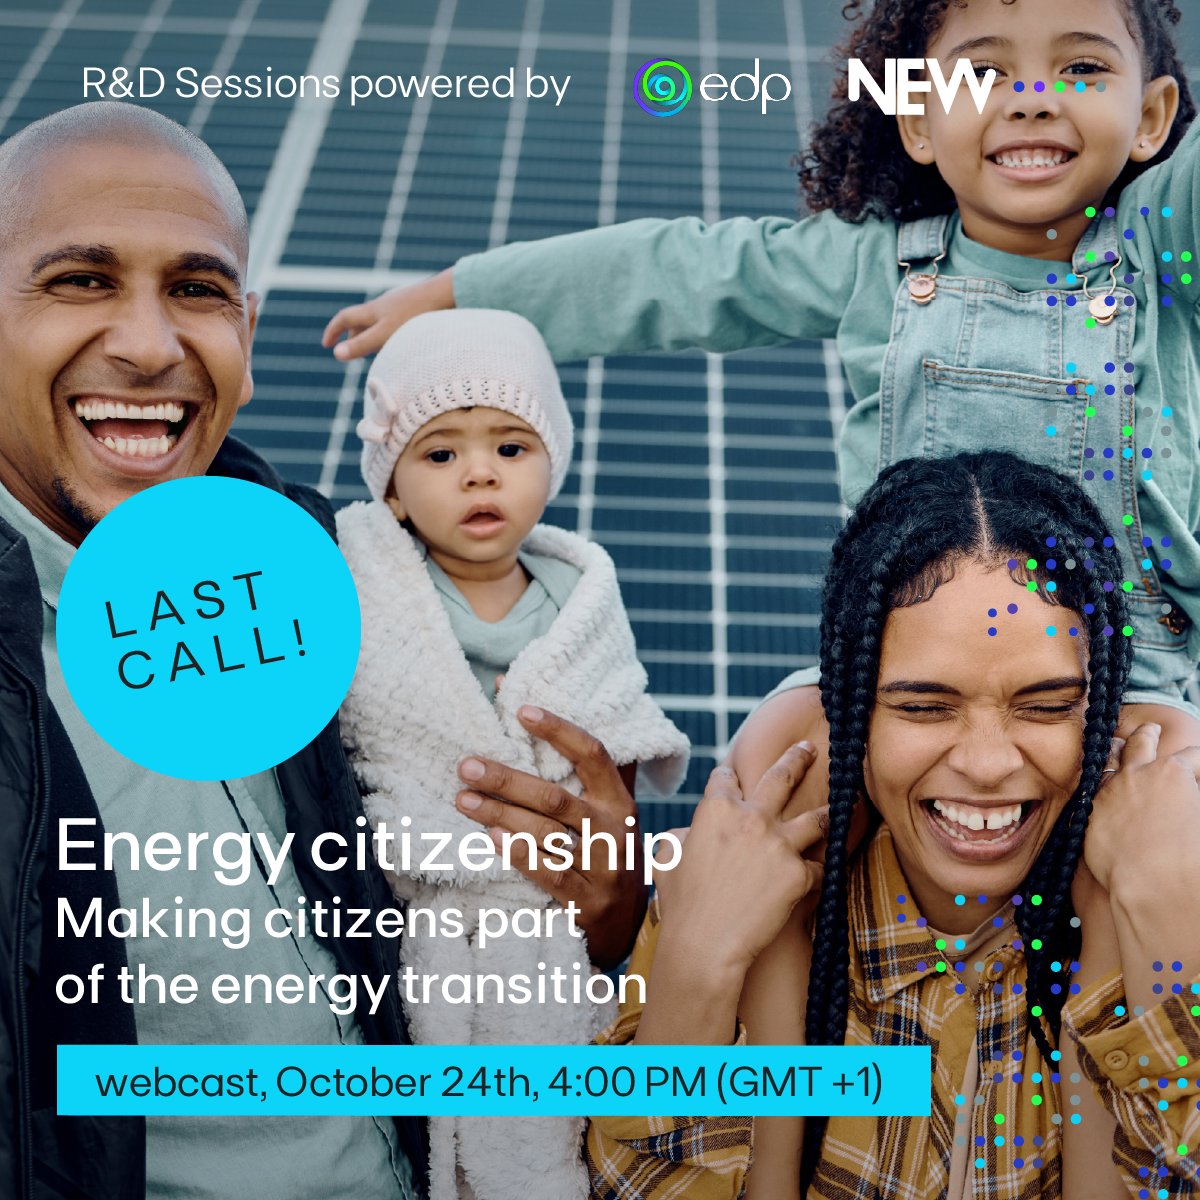 Don't miss out on our upcoming R&D Session hosted by EDP on 24/10 under the theme 'Energy citizenship: Making citizens part of the energy transition. 

Set a reminder now and join me: ms.spr.ly/6013908bd 

#EDPWeChooseEarth #AllGreen2030 #InnovationAtEDP #EnergyTransition